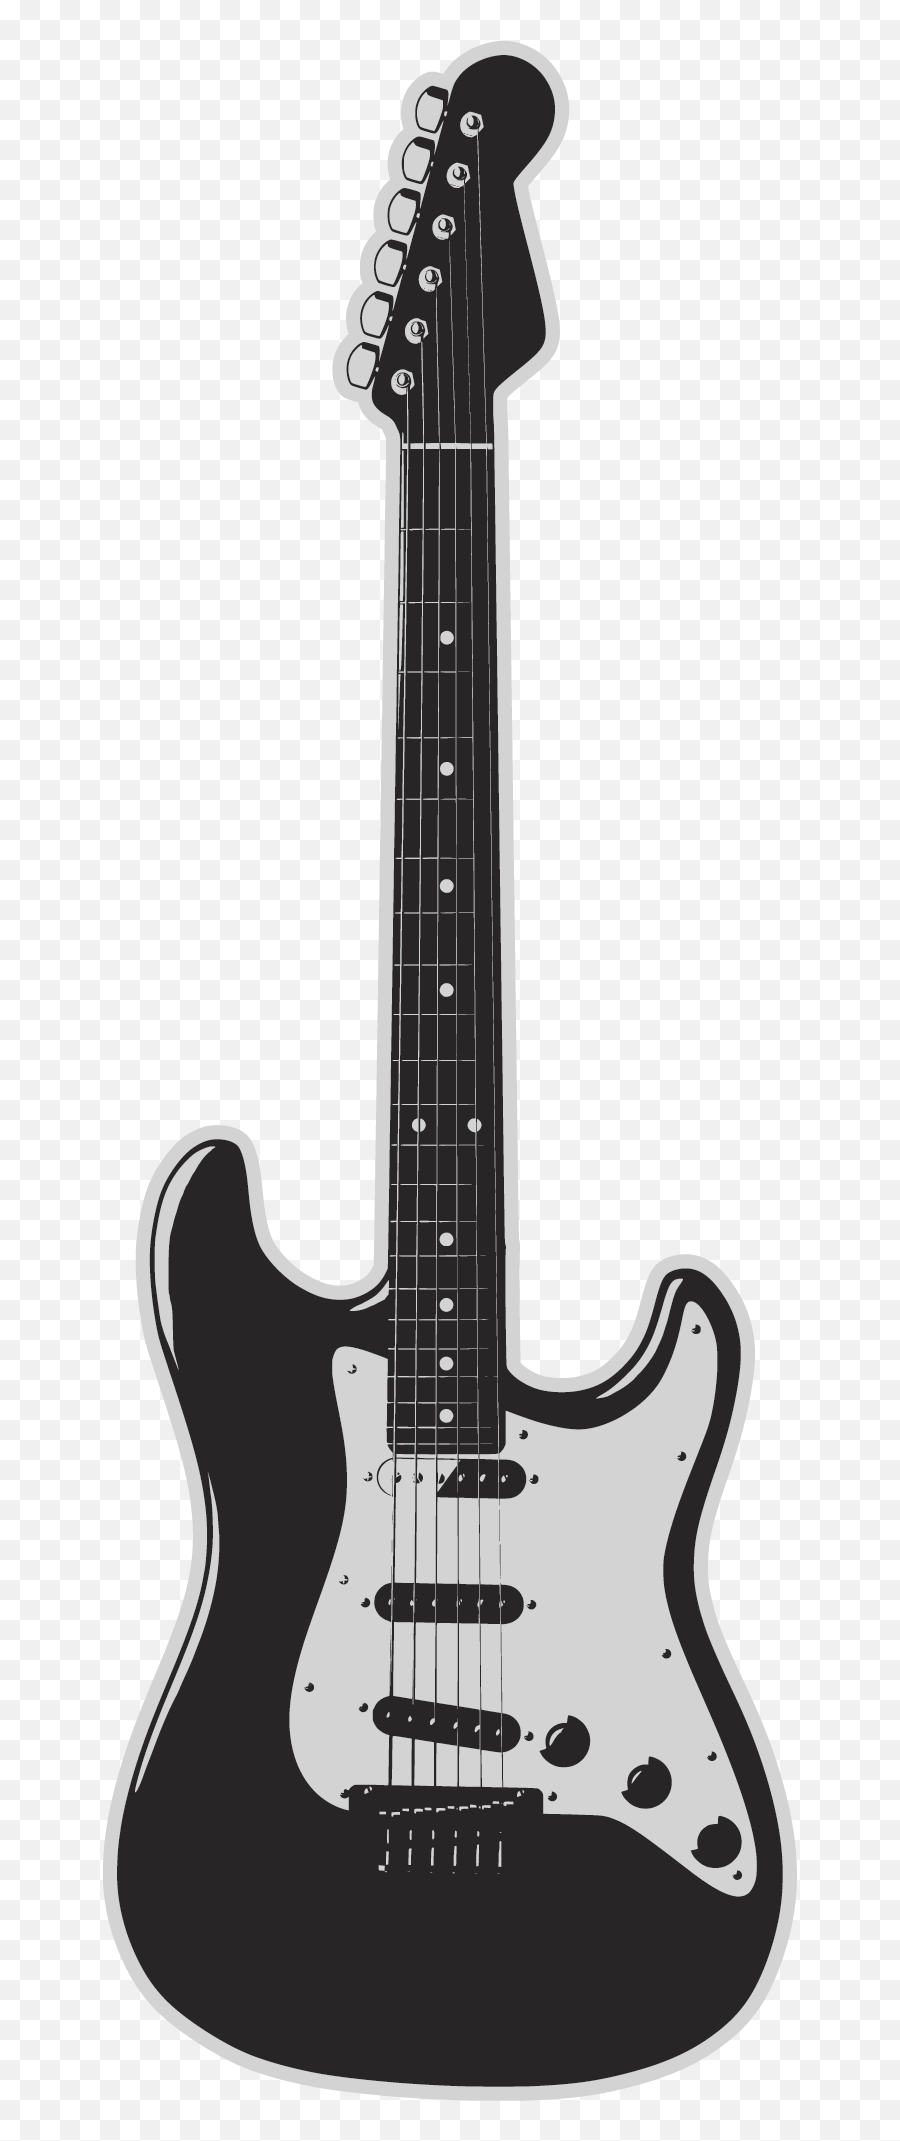 Download Electric Band Fender Guitar Instrument Vector Emoji,Electric Guitar Clipart Black And White